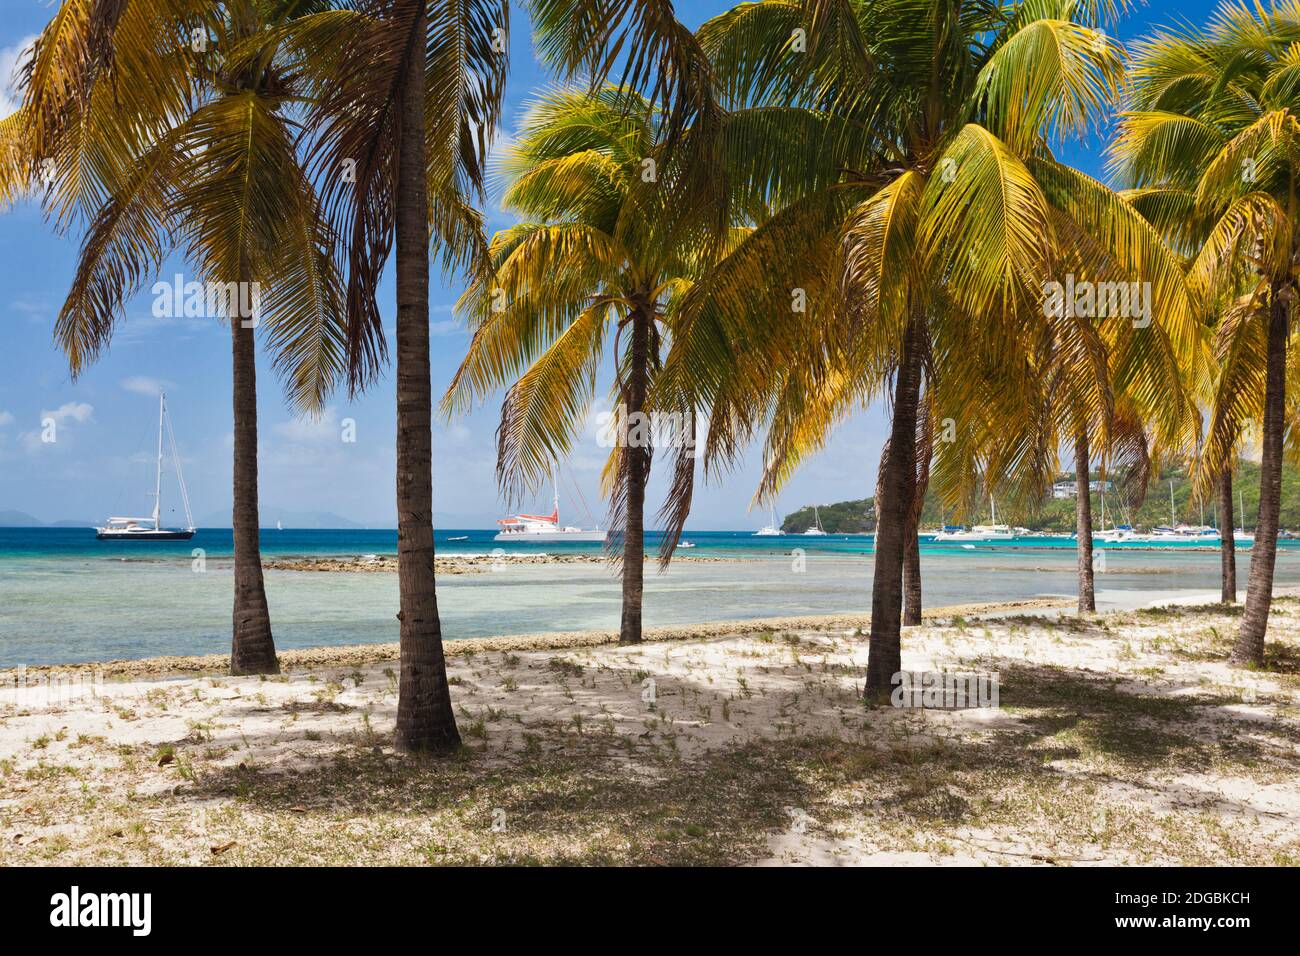 Palm trees on beach, Britannia Bay, Mustique, Saint Vincent And The Grenadines Stock Photo